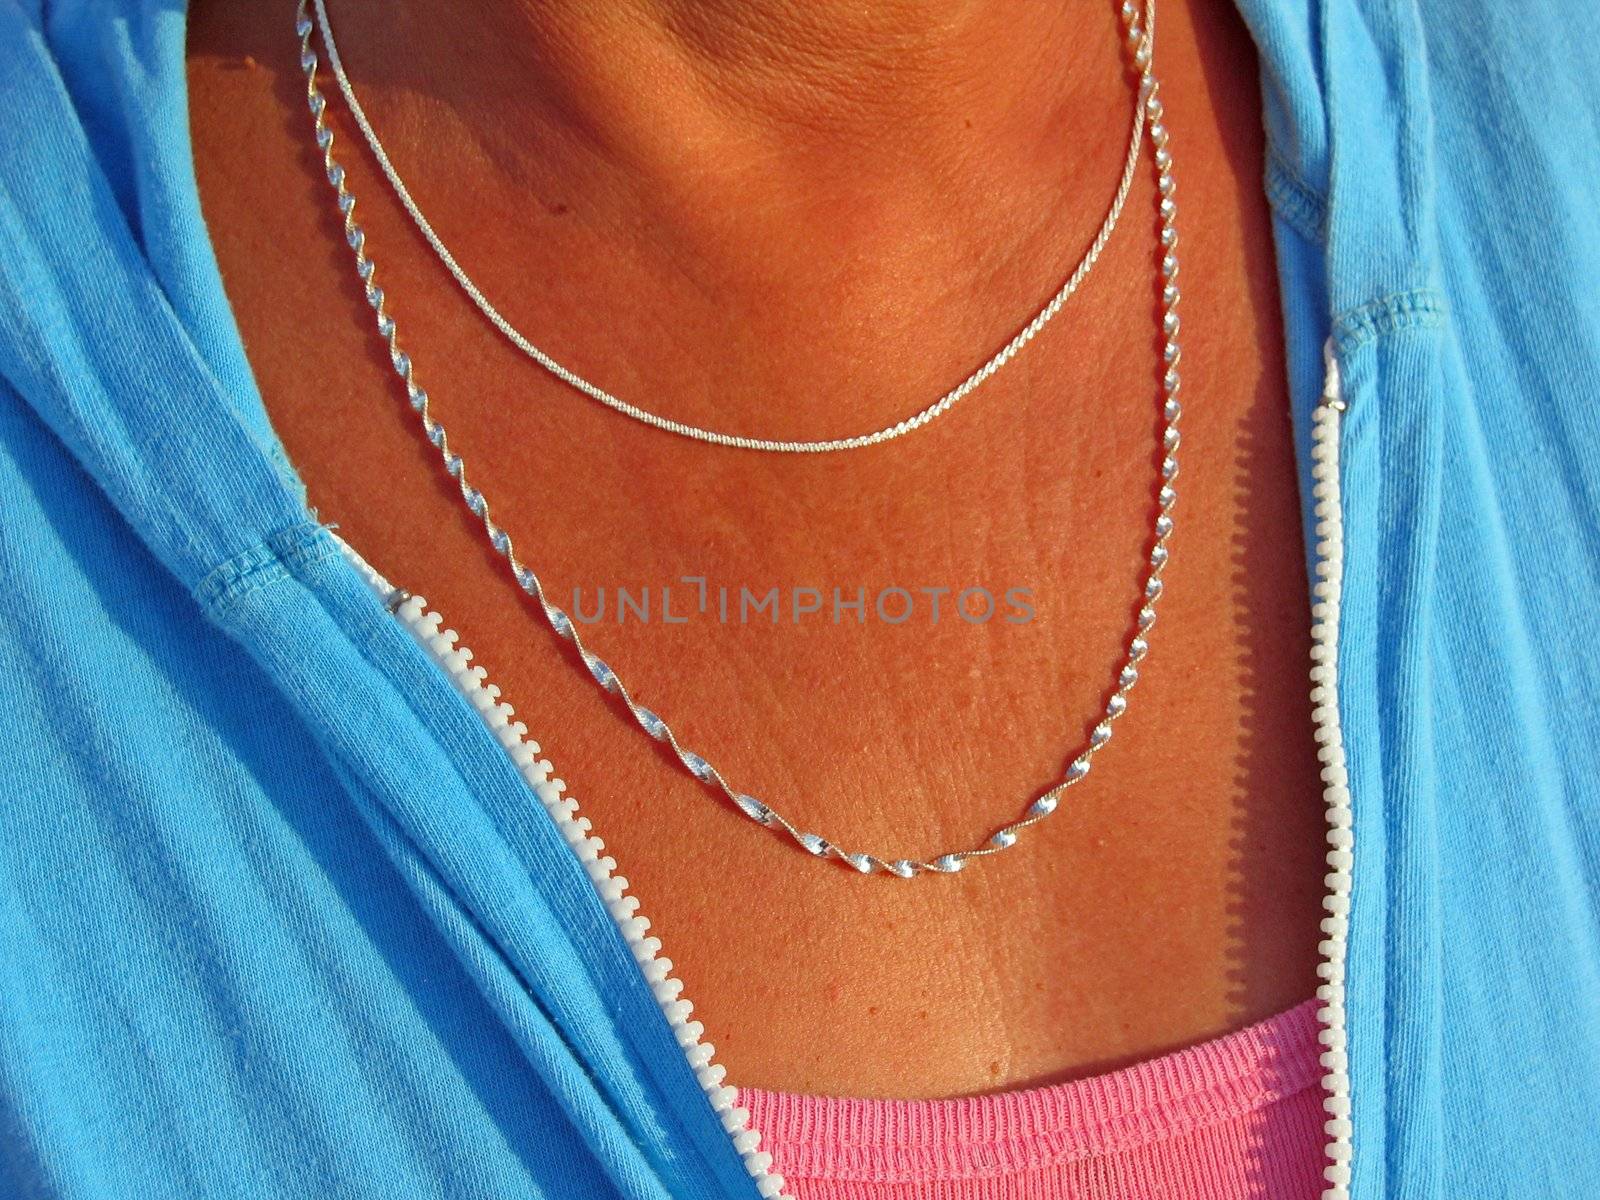 Two silver necklaces adorn the neck of a tanned middle aged woman